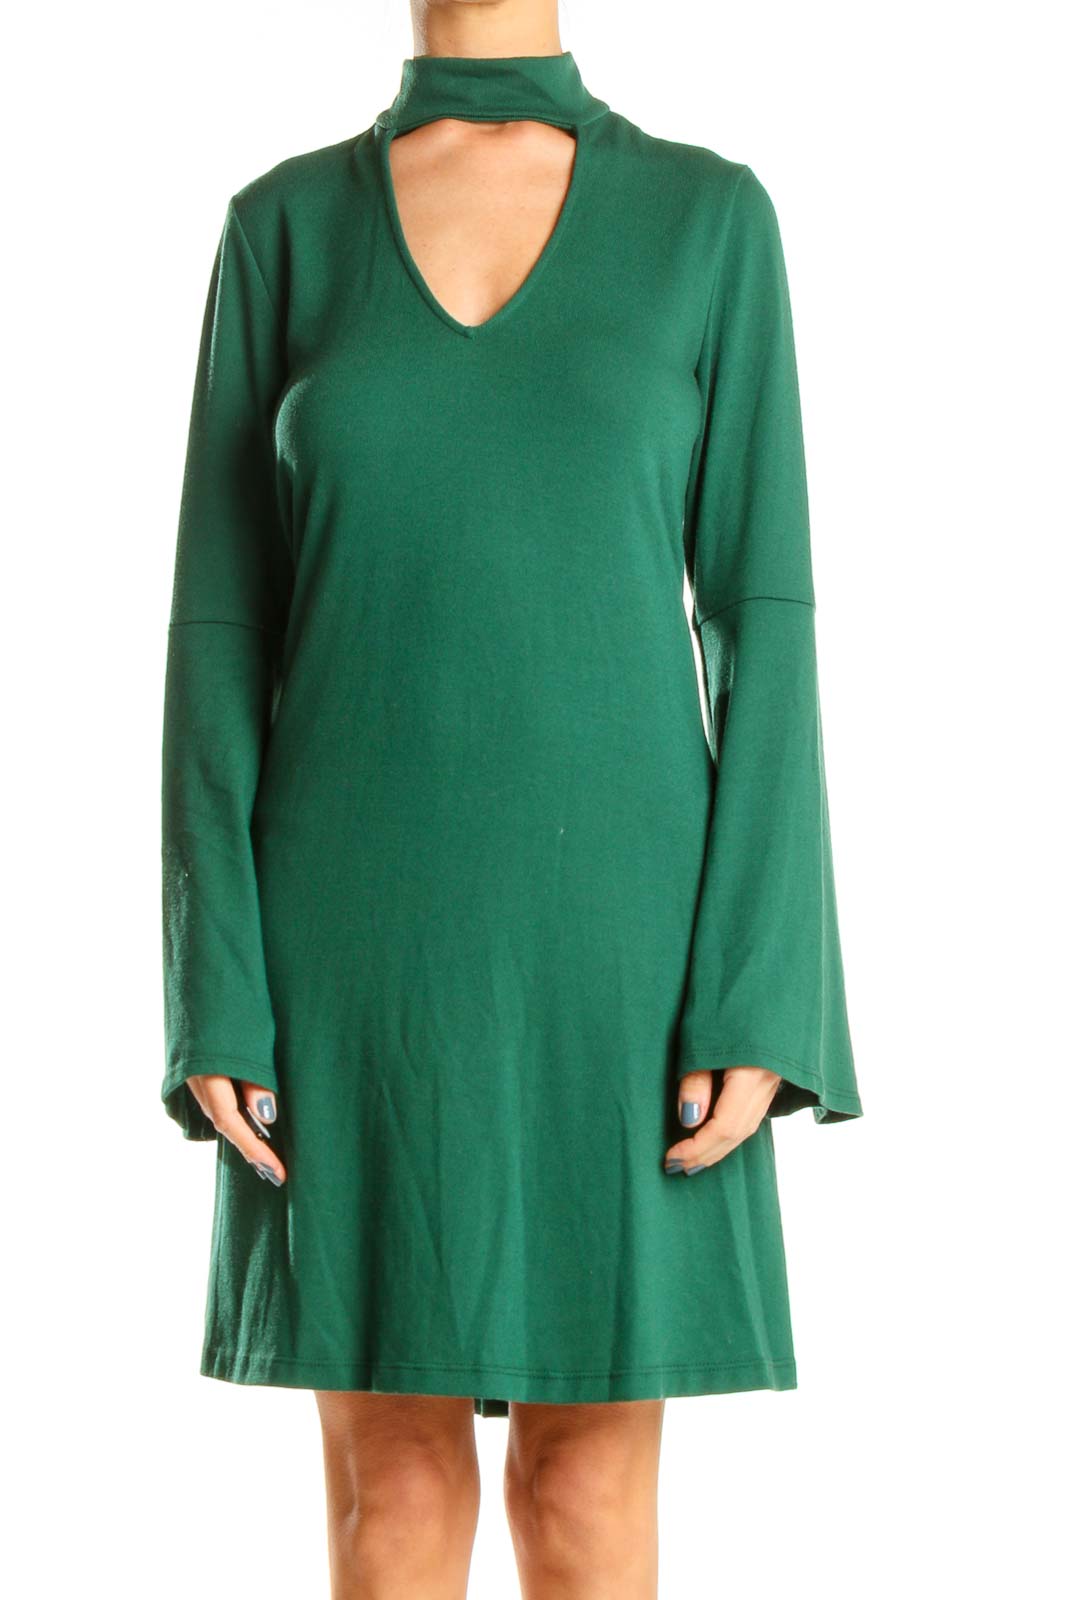 Green Day High Neck Sheath Dress With Cutout Detail Front